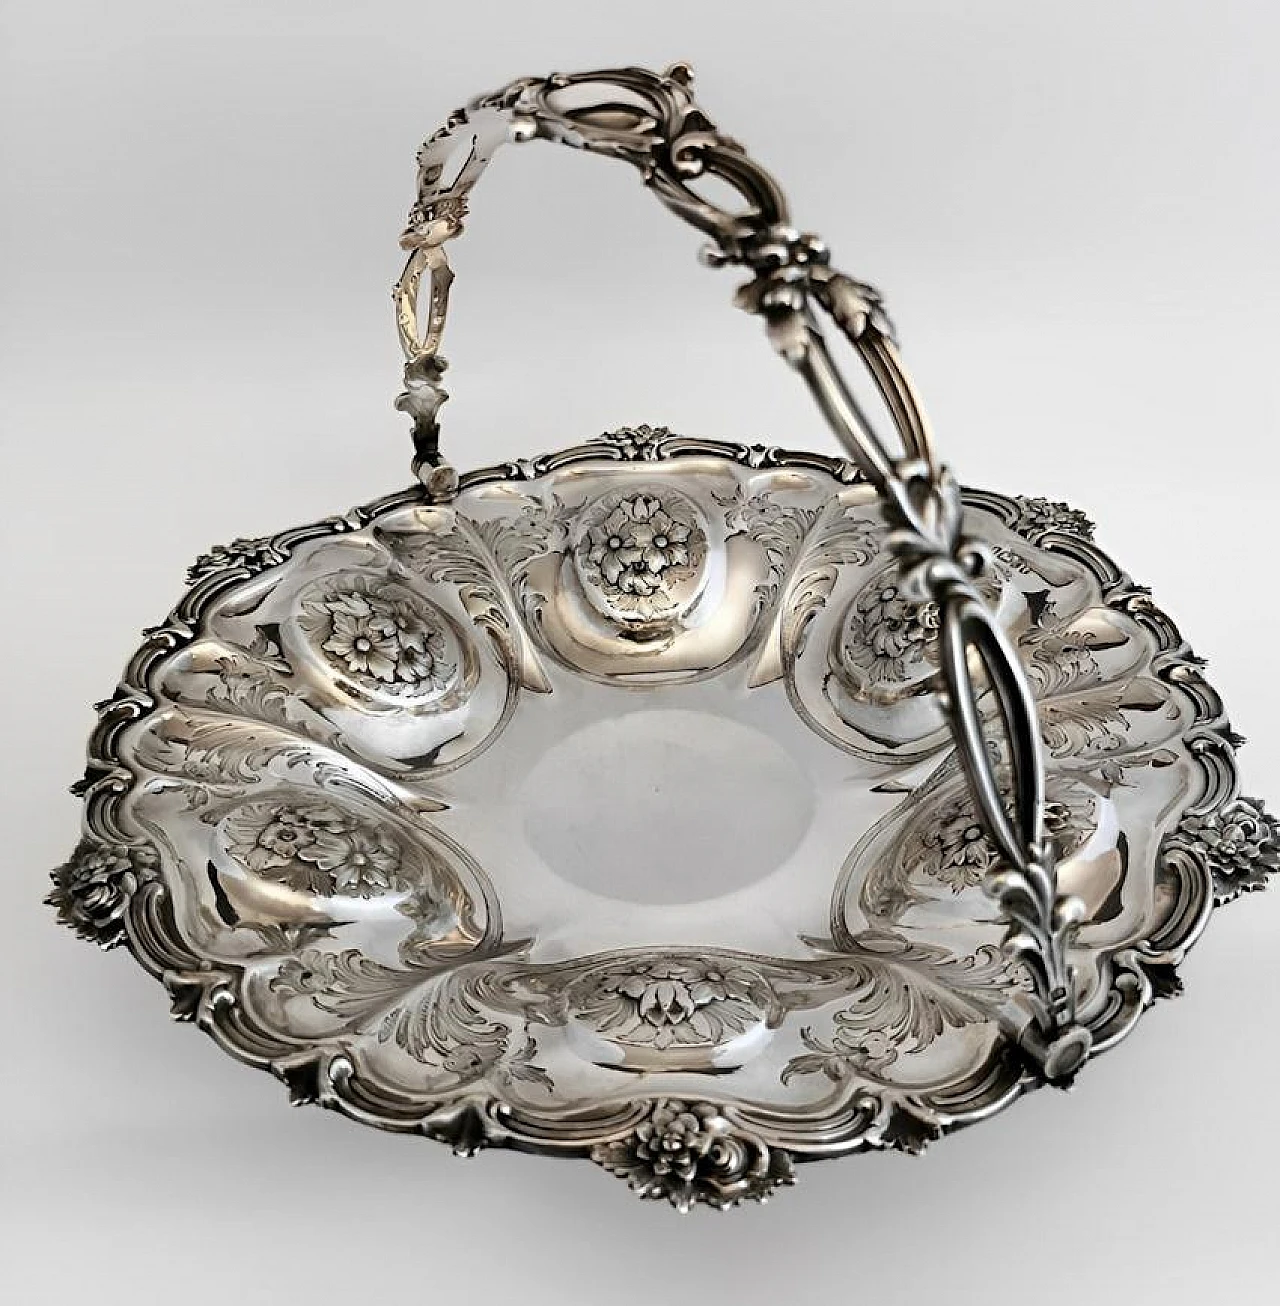 Victorian chiselled and engraved 925 silver basket, late 19th century 5